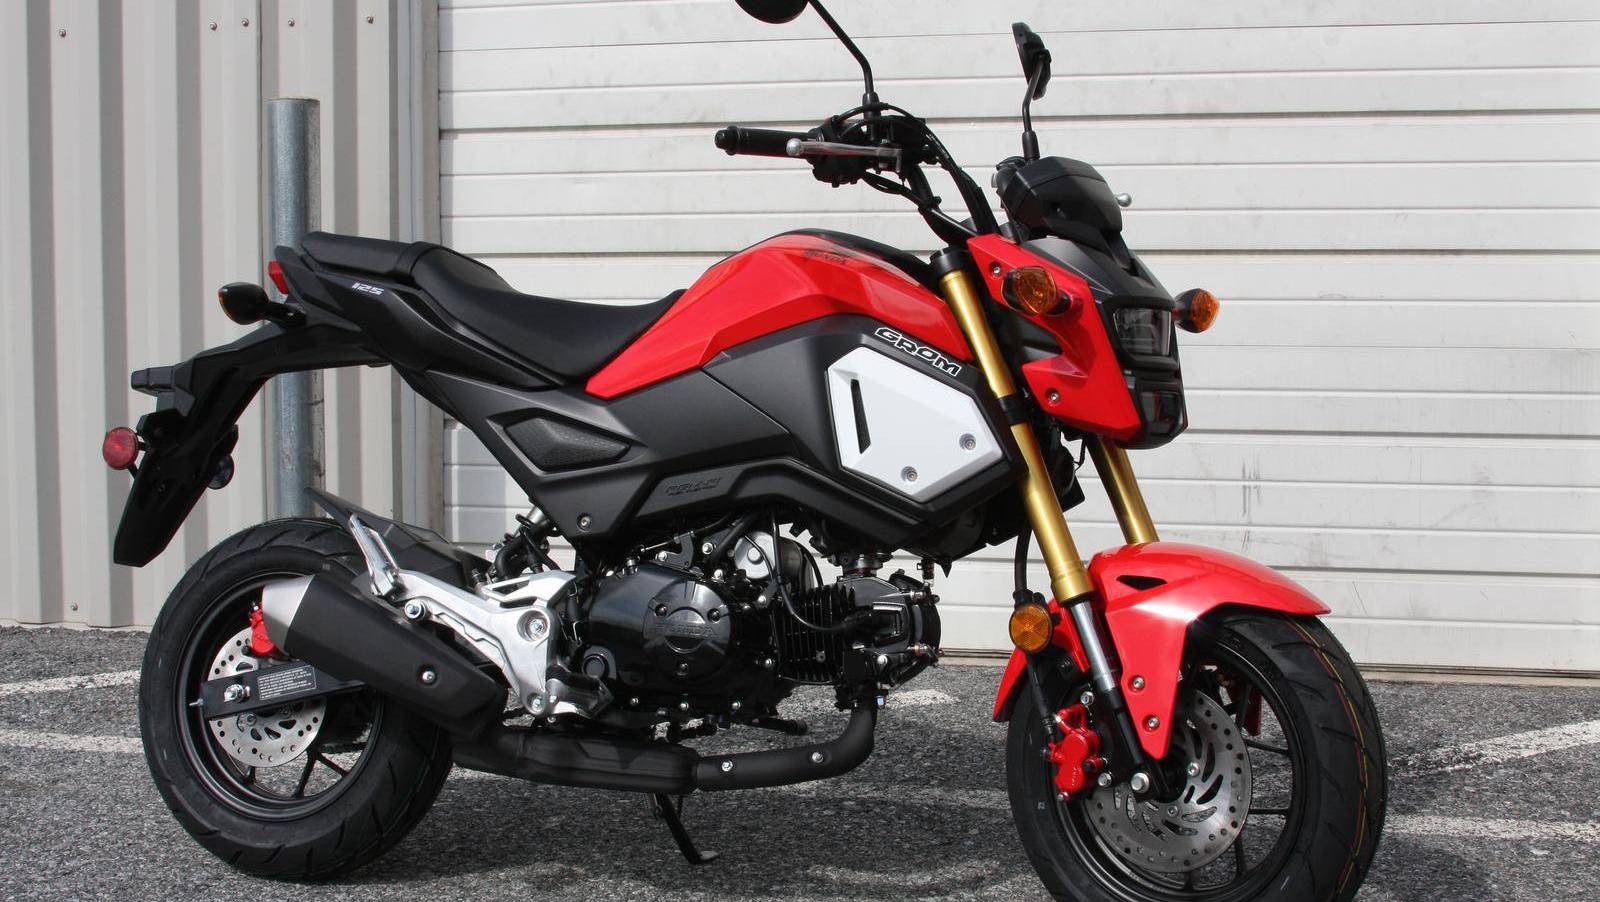 Honda Grom Abs For Rent Near Conroe Tx Riders Share